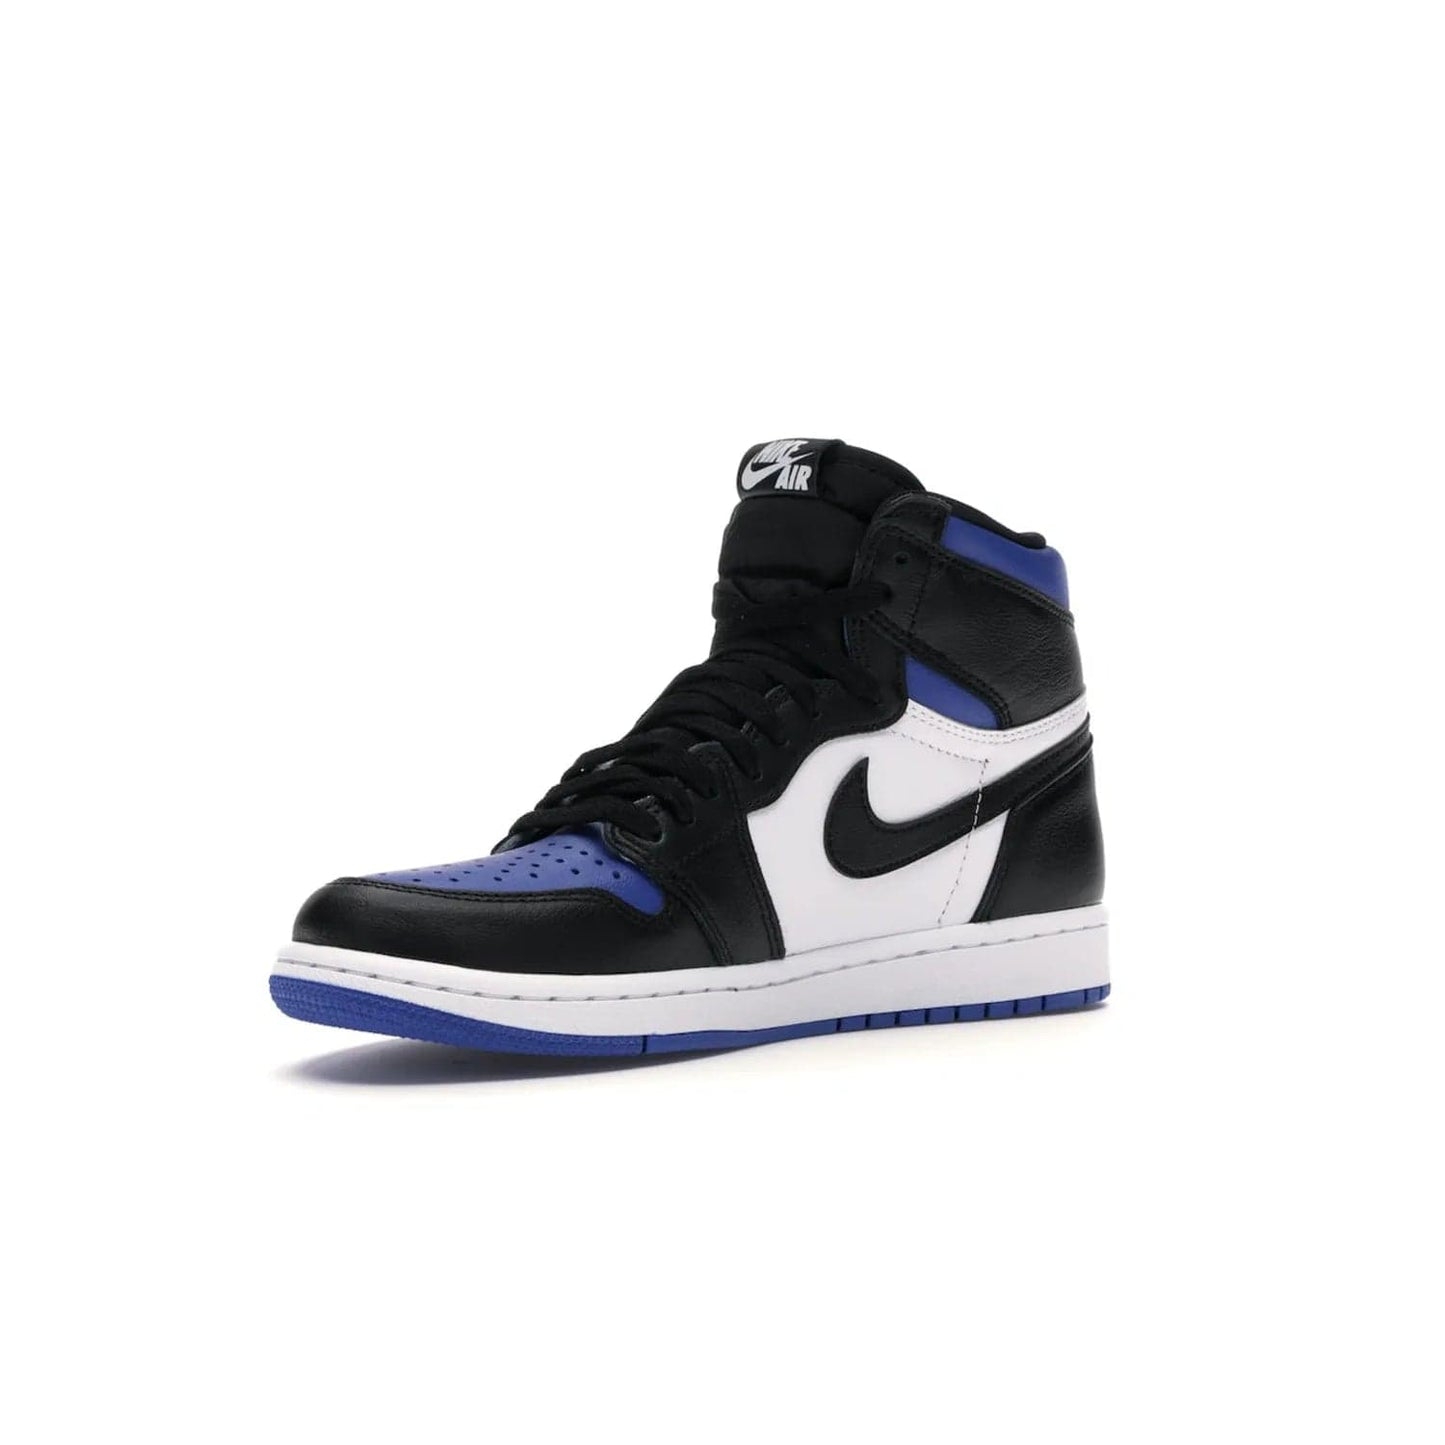 Jordan 1 Retro High Royal Toe - Image 15 - Only at www.BallersClubKickz.com - Refresh your look with the Jordan 1 Retro High Royal Toe. This classic AJ 1 sports a white and royal leather upper, black leather overlays, and branded leather tongue tag. Pick up today and set the streets ablaze.